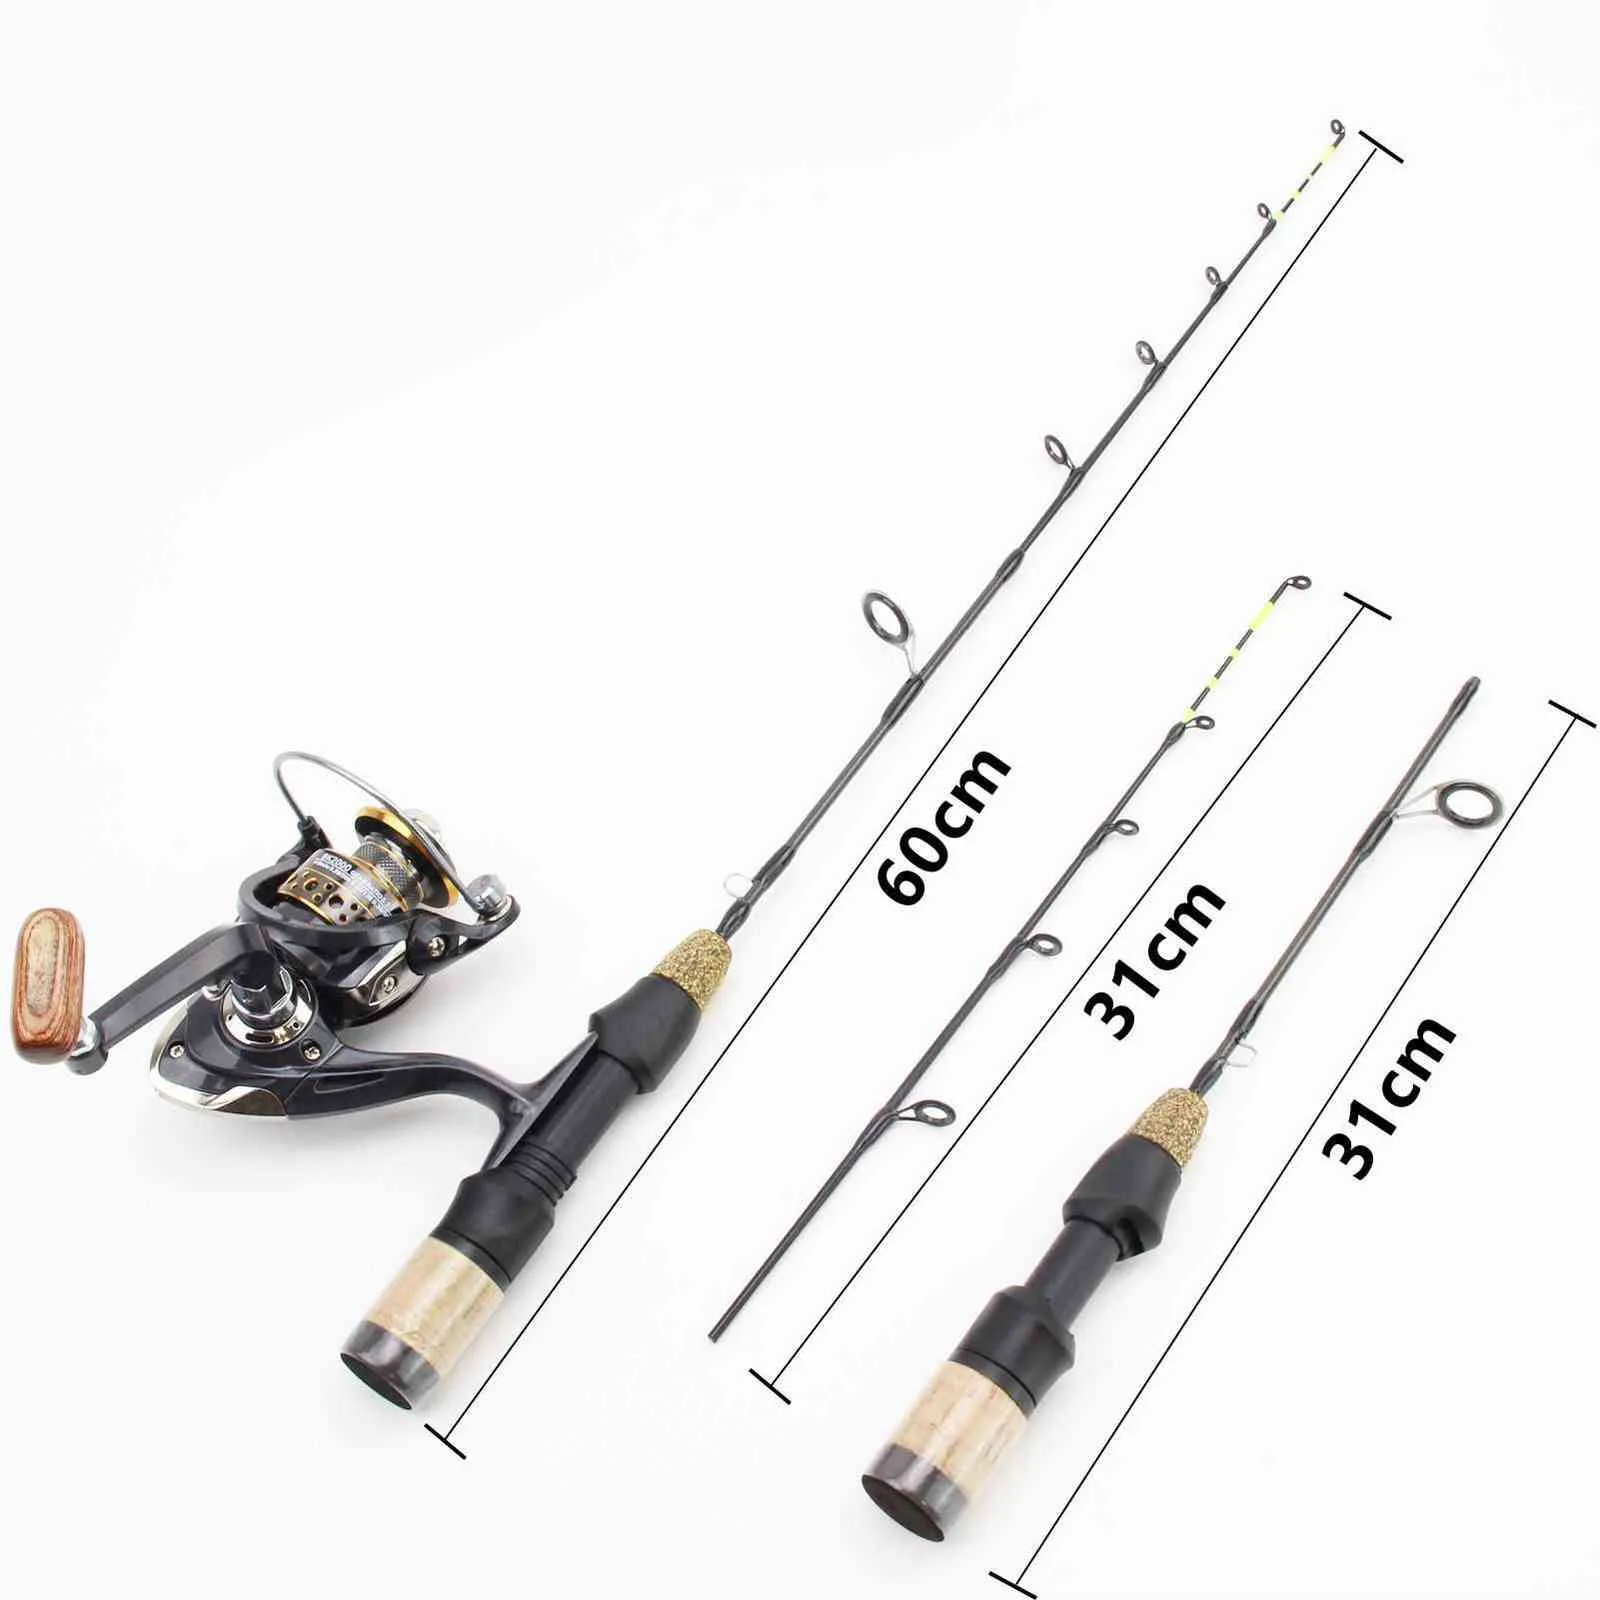 Winter Ice Fishing Set In 60cm Carbon Pole Tackle With 2 Tips Rod